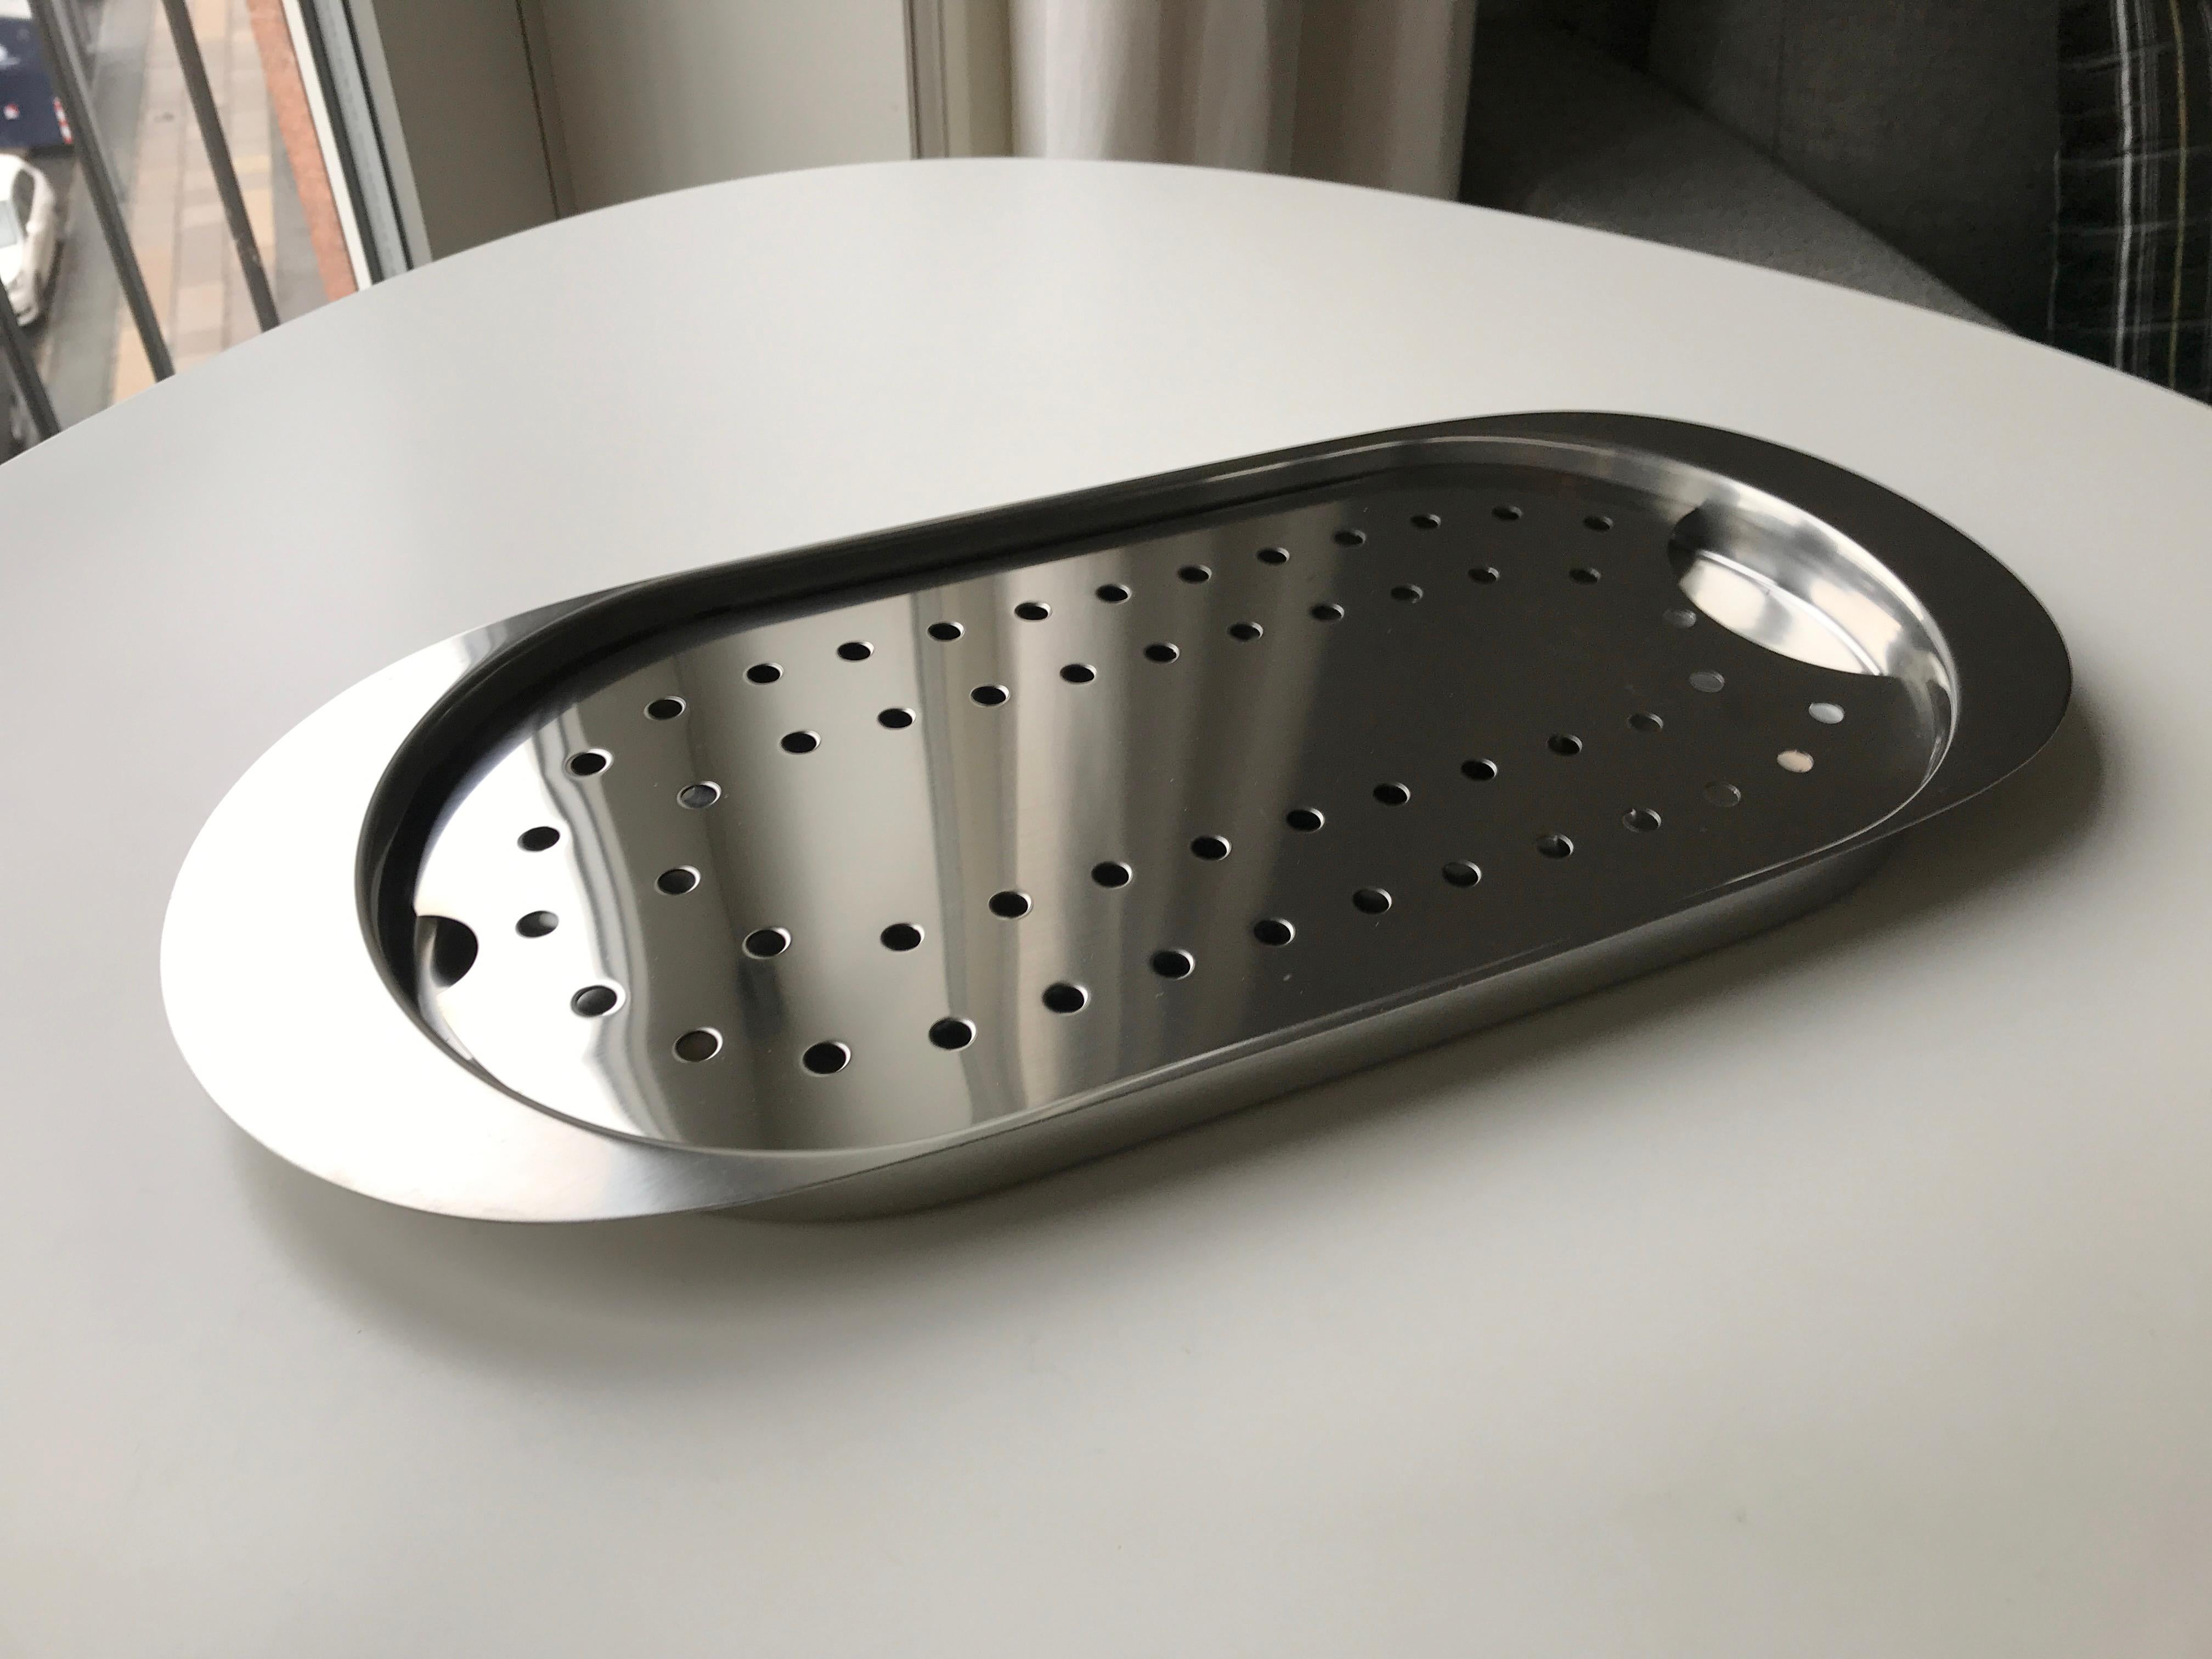 Mid-Century Scandinavian Modern Arne Jacobsen Cylinda line Stelton stainless steel tray. Part of the Cylinda Line designed by architect Arne Jacobsen in the 1960s. Arne Jacobsen is world famous for his design for the SAS Royal Hotel in central